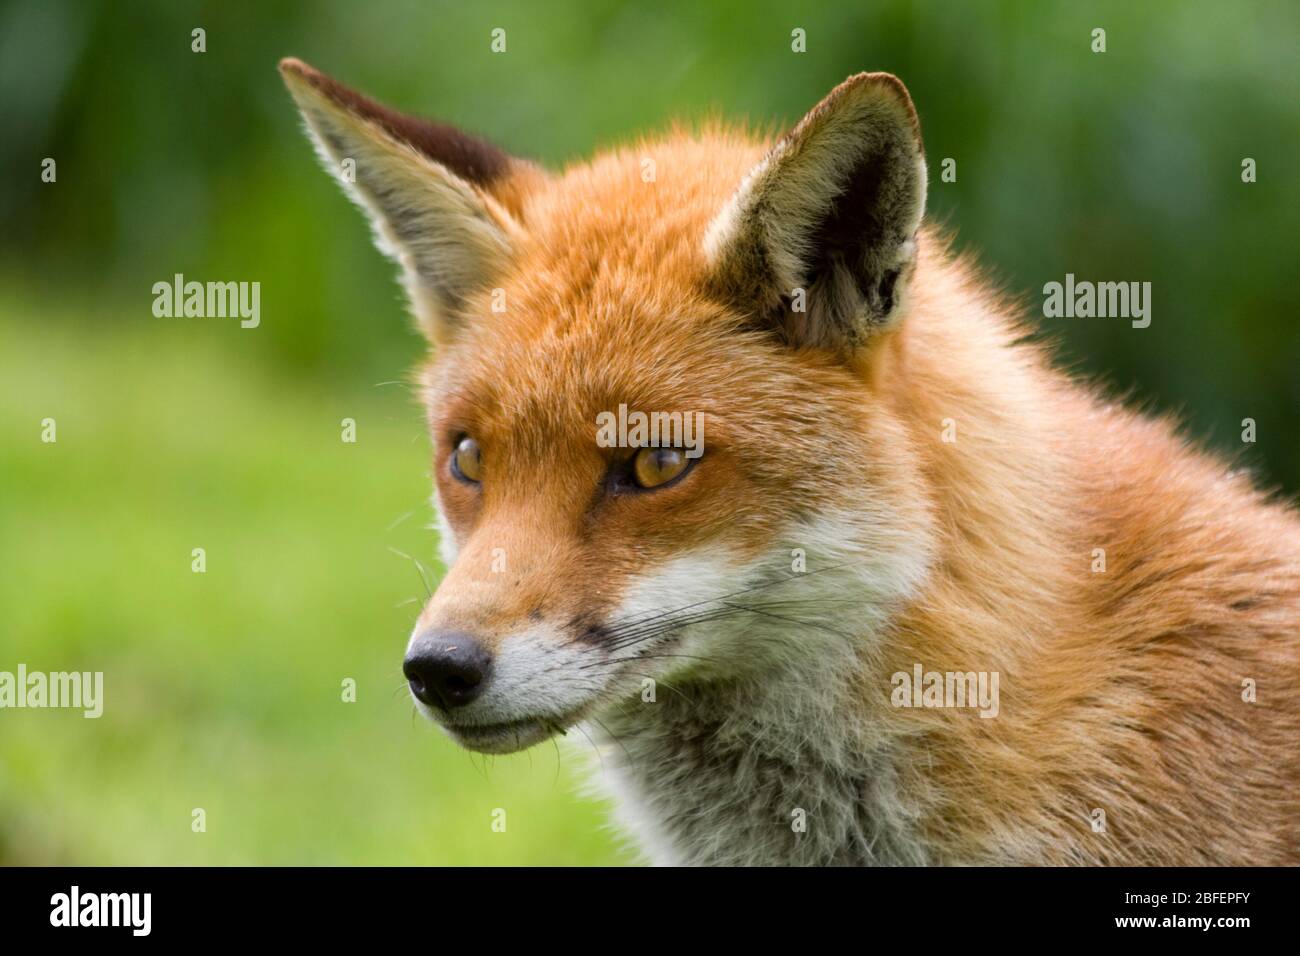 Fox Vulpes vulpes red brown fur white underside throat chin and inside ears black on ears and legs forward looking eyes dog like pointed  muzzle Stock Photo